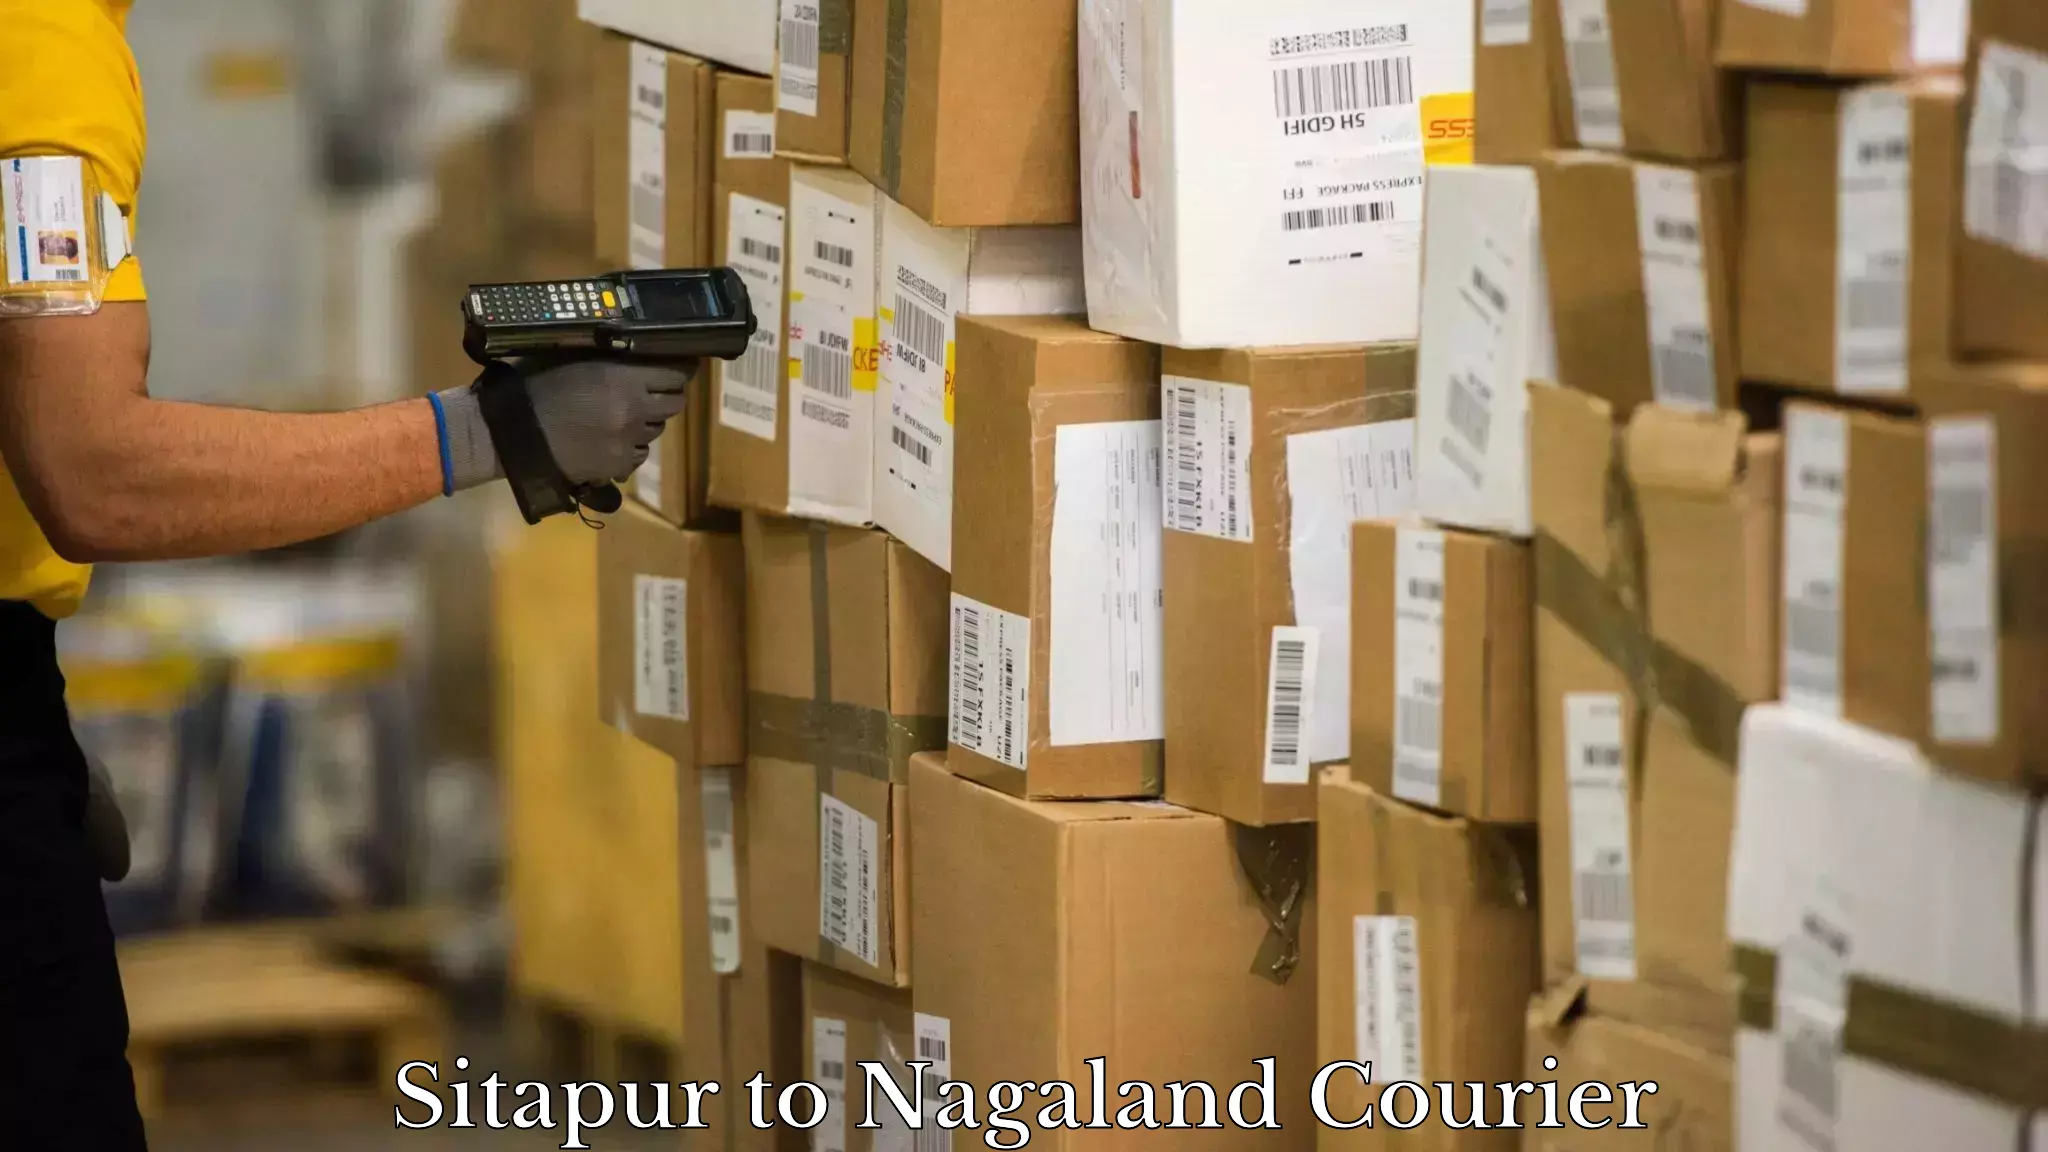 State-of-the-art courier technology Sitapur to Nagaland